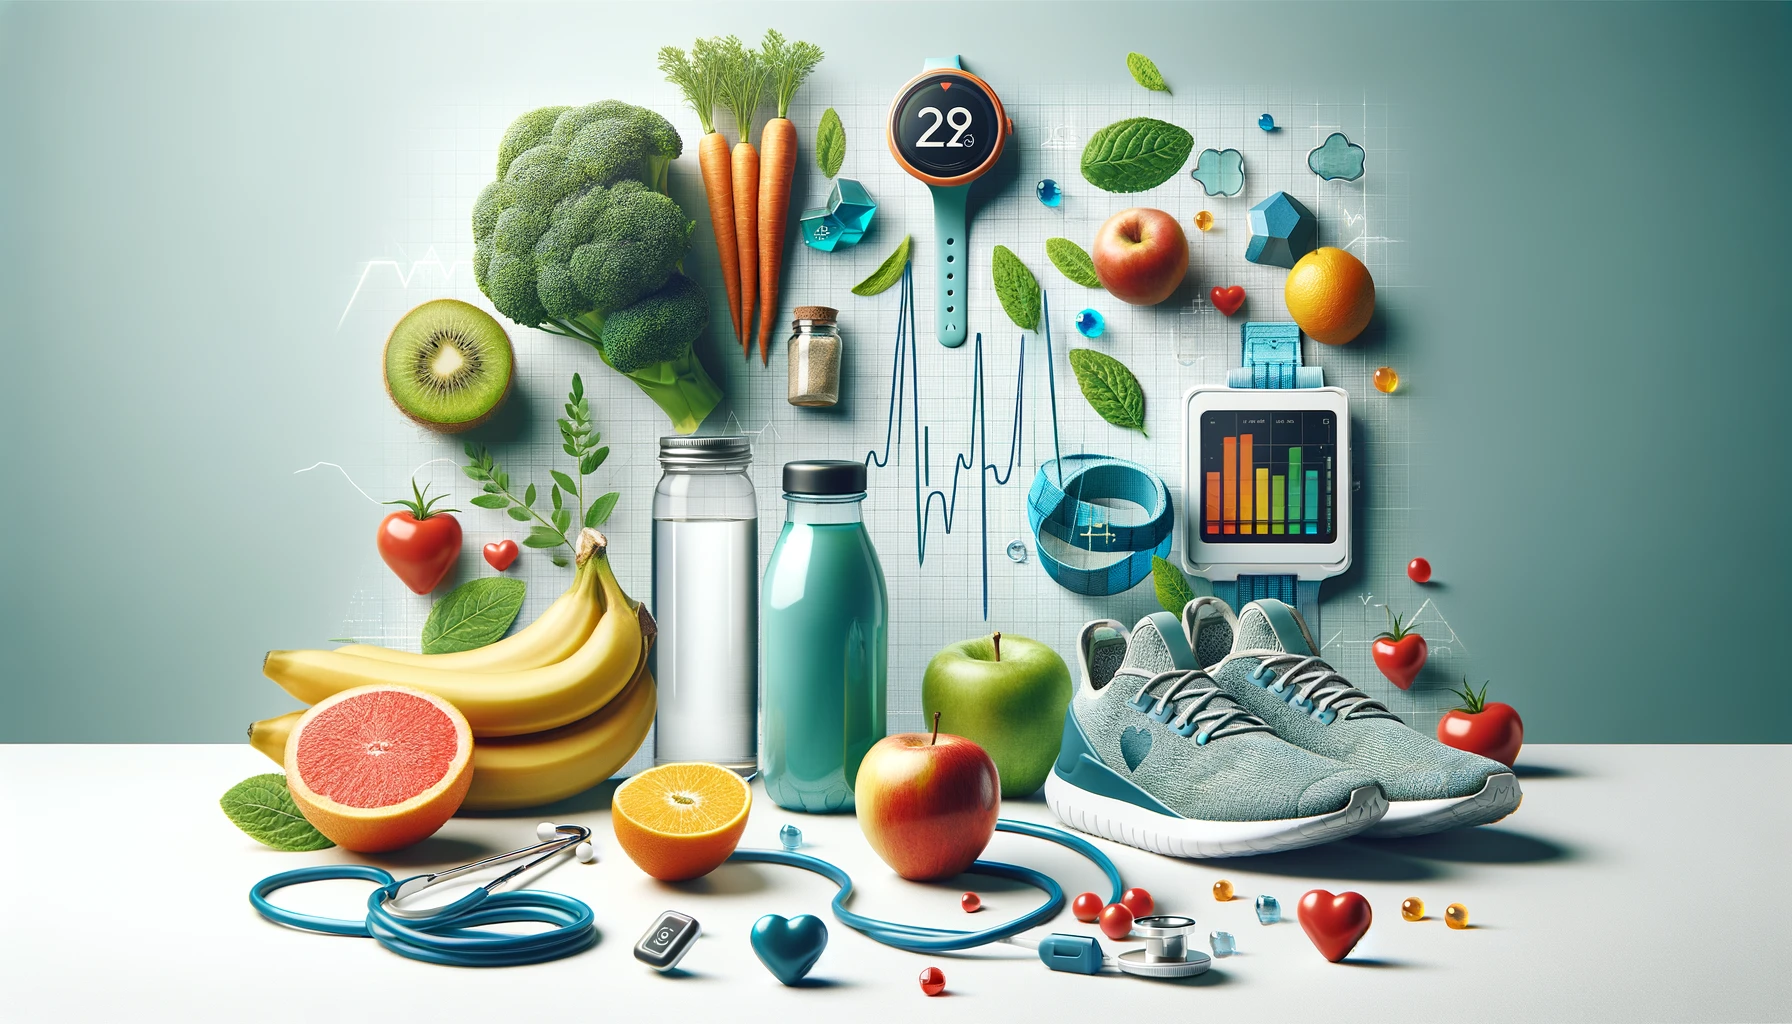 Health tips concept image with fruits, vegetables, and fitness gear, featured on "Healthy Life - New Start" blog.